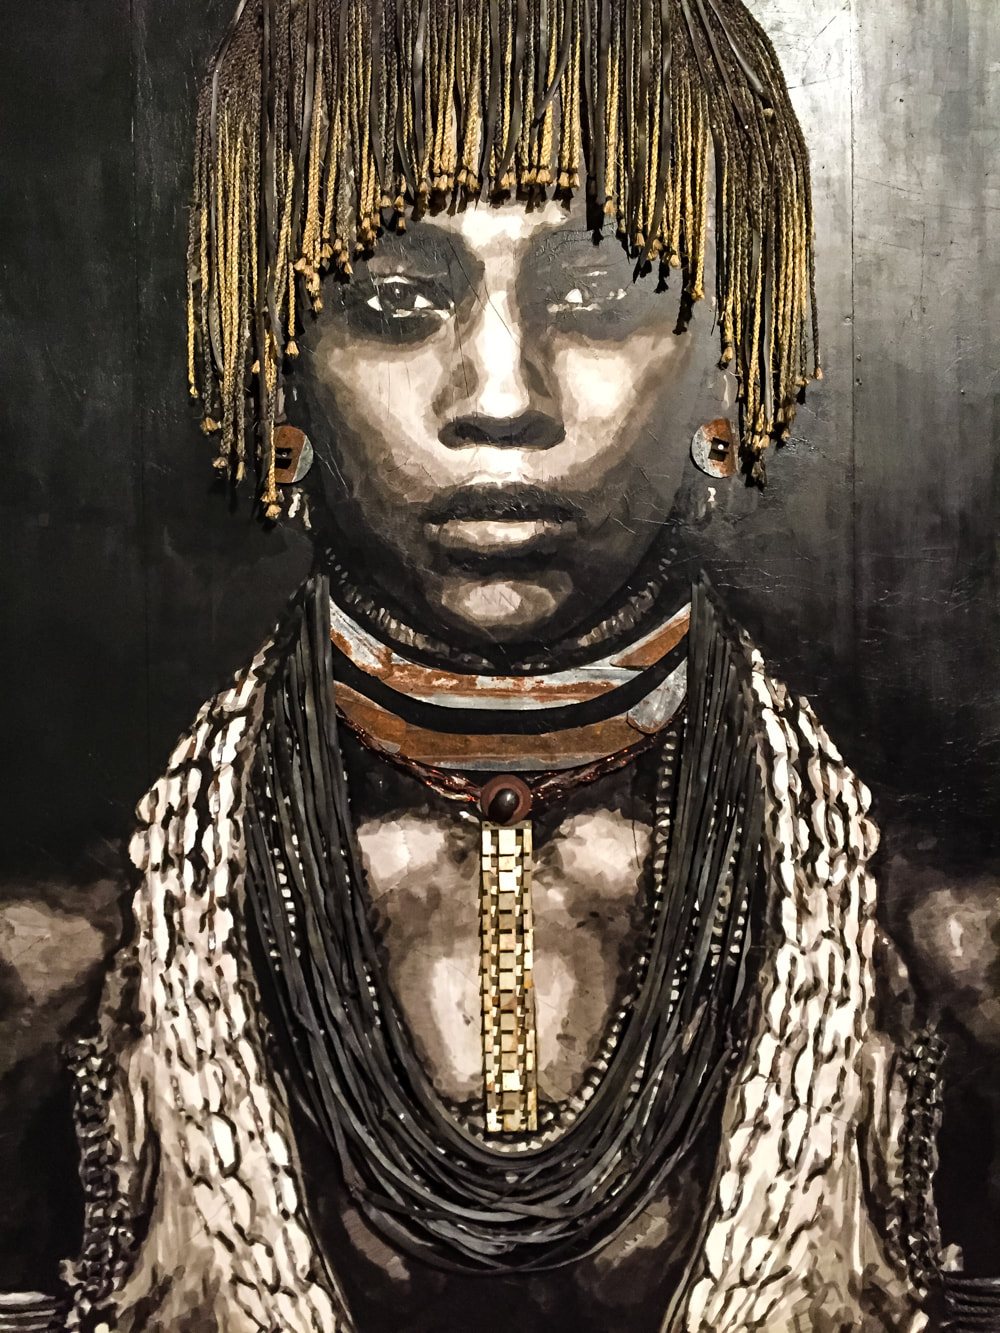 Singapore: Art From The Streets Exhibition at the ArtScience Museum - Empress Ngatini - YZ - 2018.